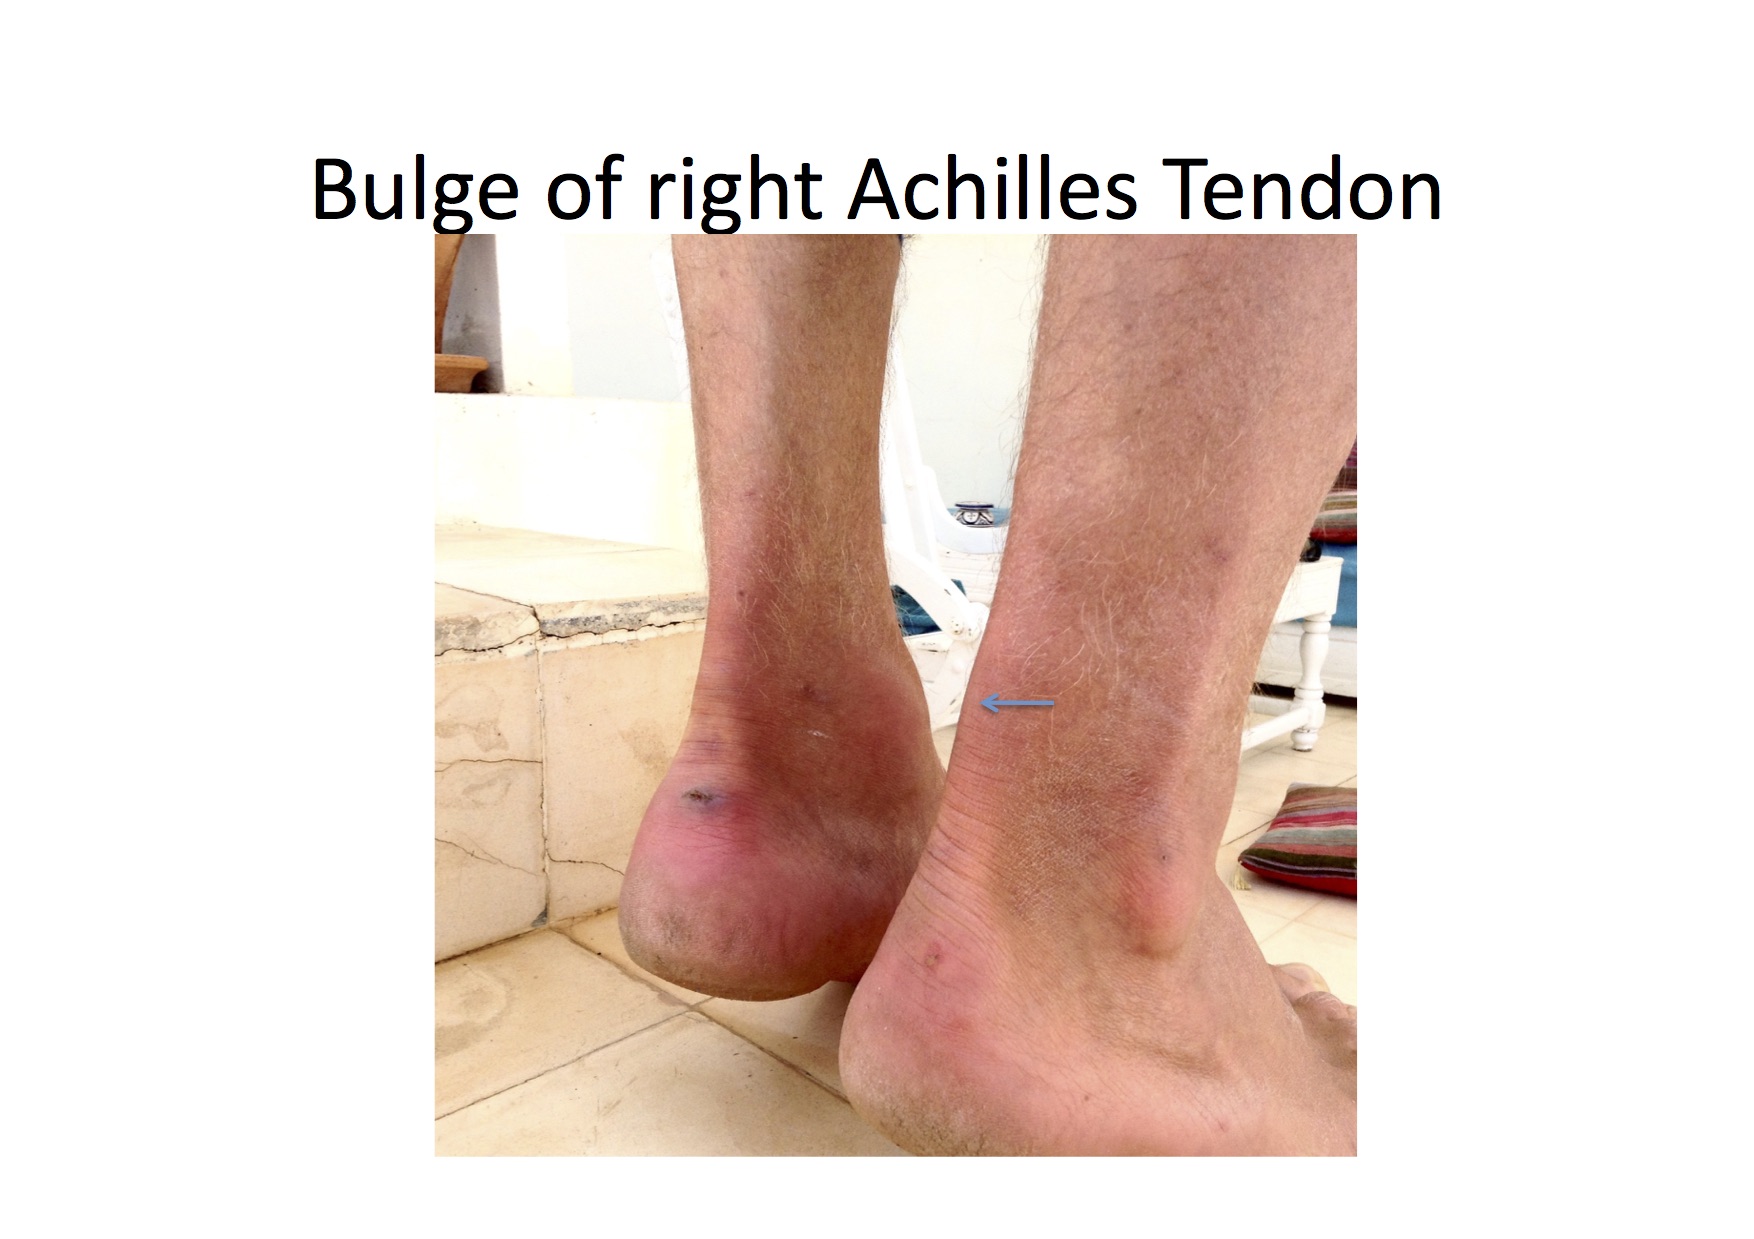 Partial Tear Of The Achilles Tendon - Ankle - Conditions - Musculoskeletal  - What We Treat - Physio.co.uk